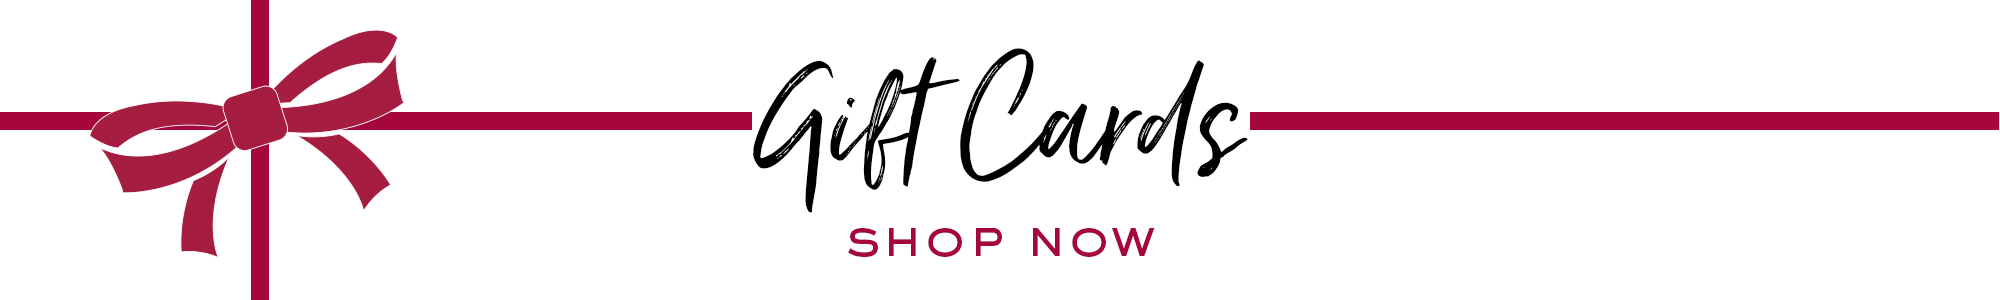 Title saying Gift Cards